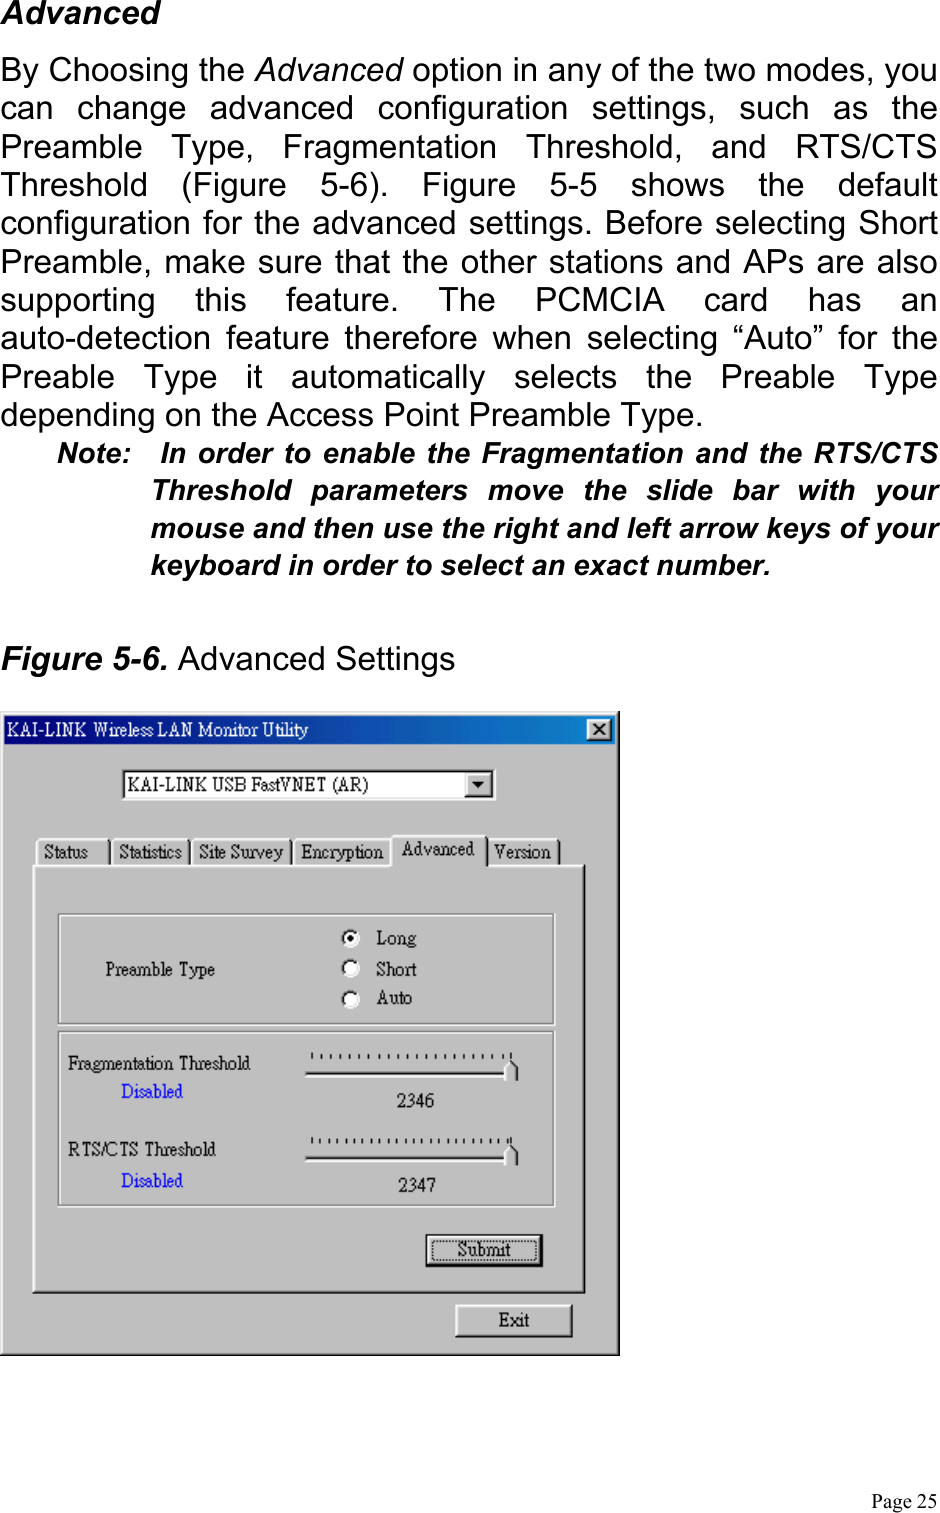  Page 25 Advanced By Choosing the Advanced option in any of the two modes, you can change advanced configuration settings, such as the Preamble Type, Fragmentation Threshold, and RTS/CTS Threshold (Figure 5-6). Figure 5-5 shows the default configuration for the advanced settings. Before selecting Short Preamble, make sure that the other stations and APs are also supporting this feature. The PCMCIA card has an auto-detection feature therefore when selecting “Auto” for the Preable Type it automatically selects the Preable Type depending on the Access Point Preamble Type. Note:  In order to enable the Fragmentation and the RTS/CTS Threshold parameters move the slide bar with your mouse and then use the right and left arrow keys of your keyboard in order to select an exact number.  Figure 5-6. Advanced Settings   